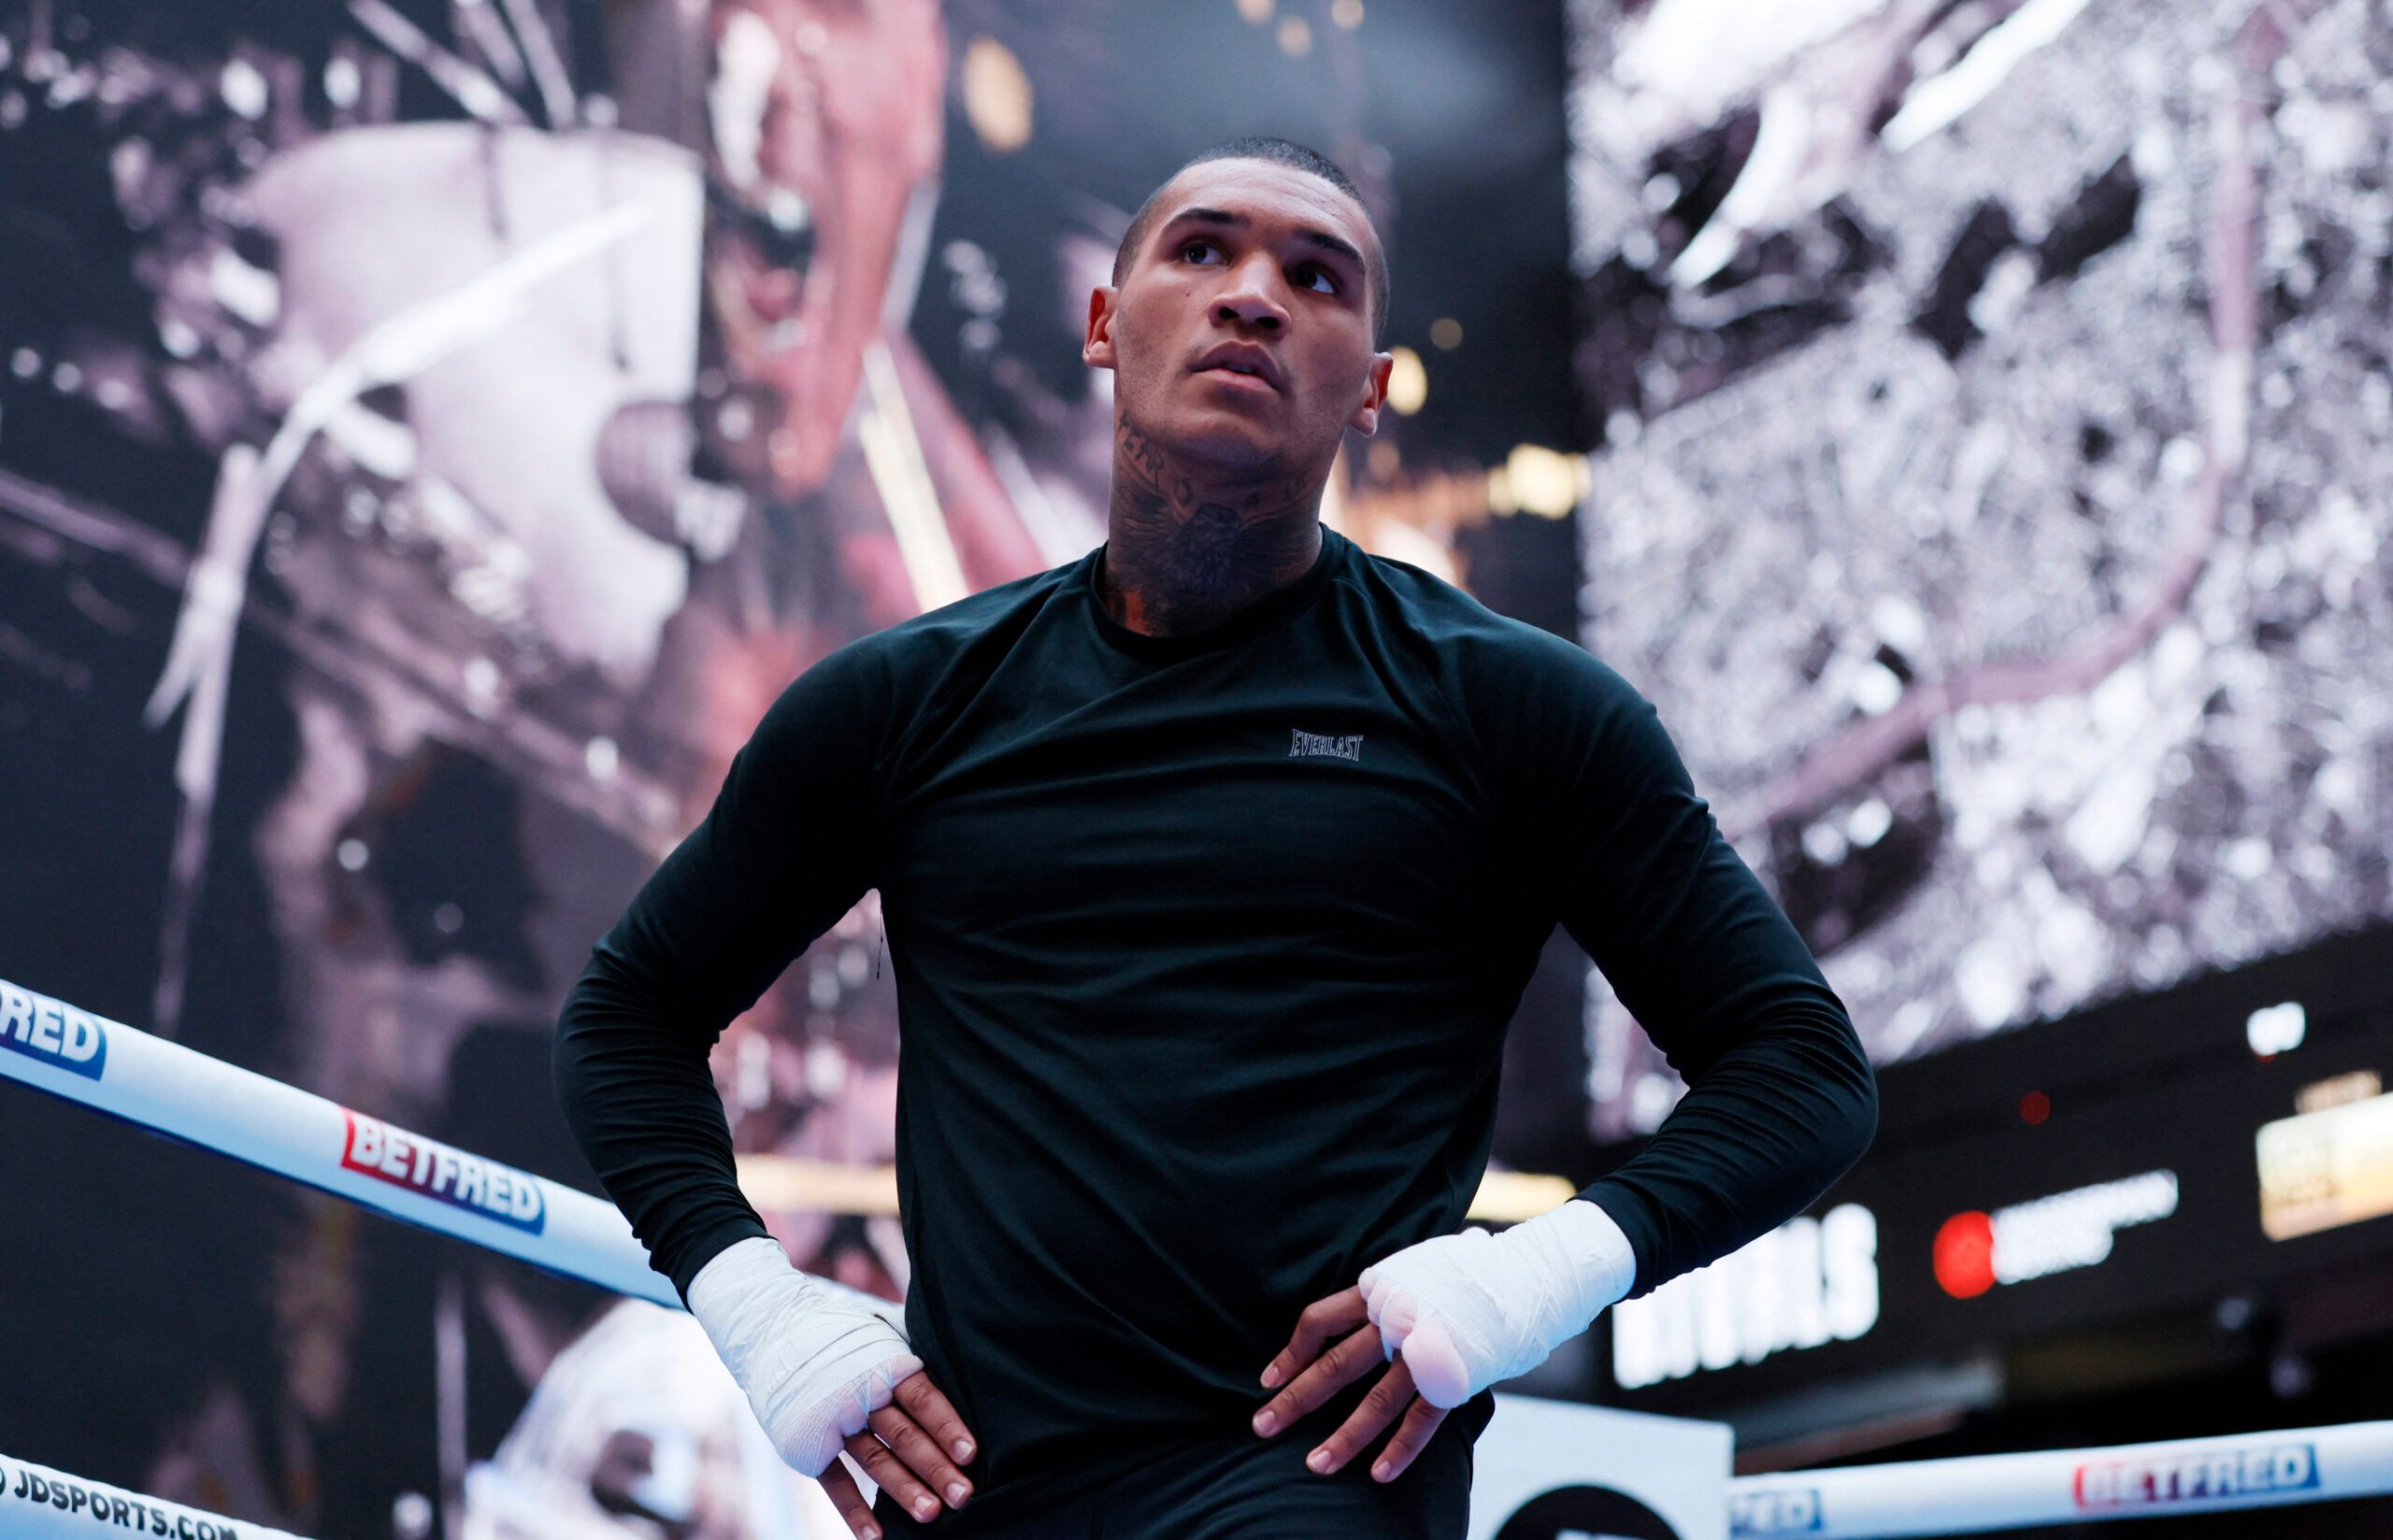 Conor Benn is facing a potential four-year ban from boxing following a failed drugs test